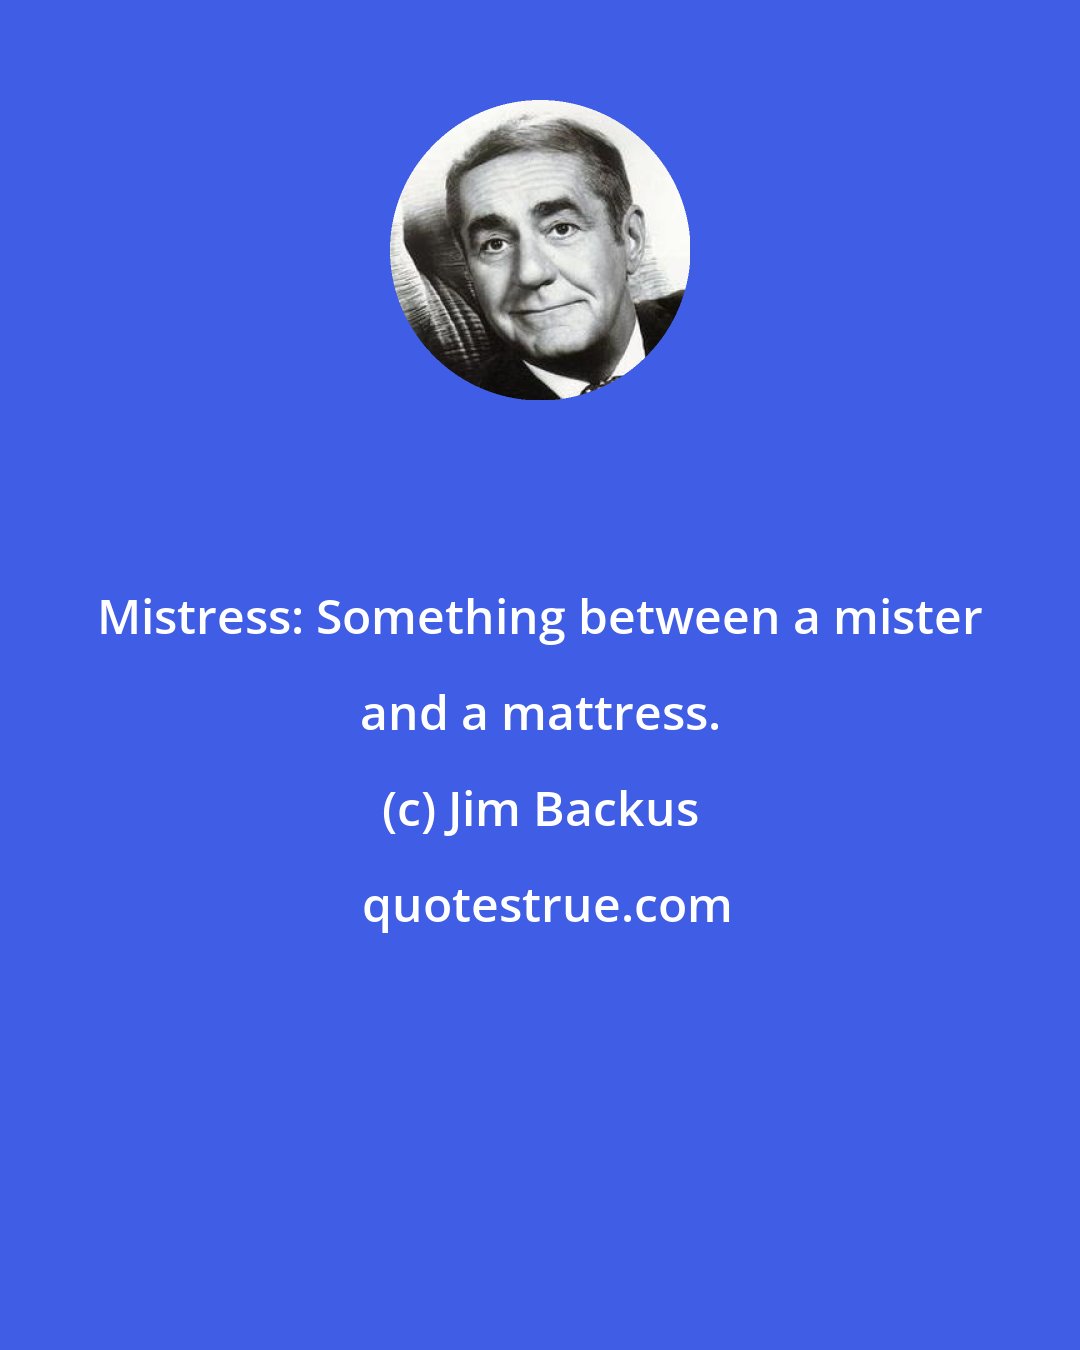 Jim Backus: Mistress: Something between a mister and a mattress.